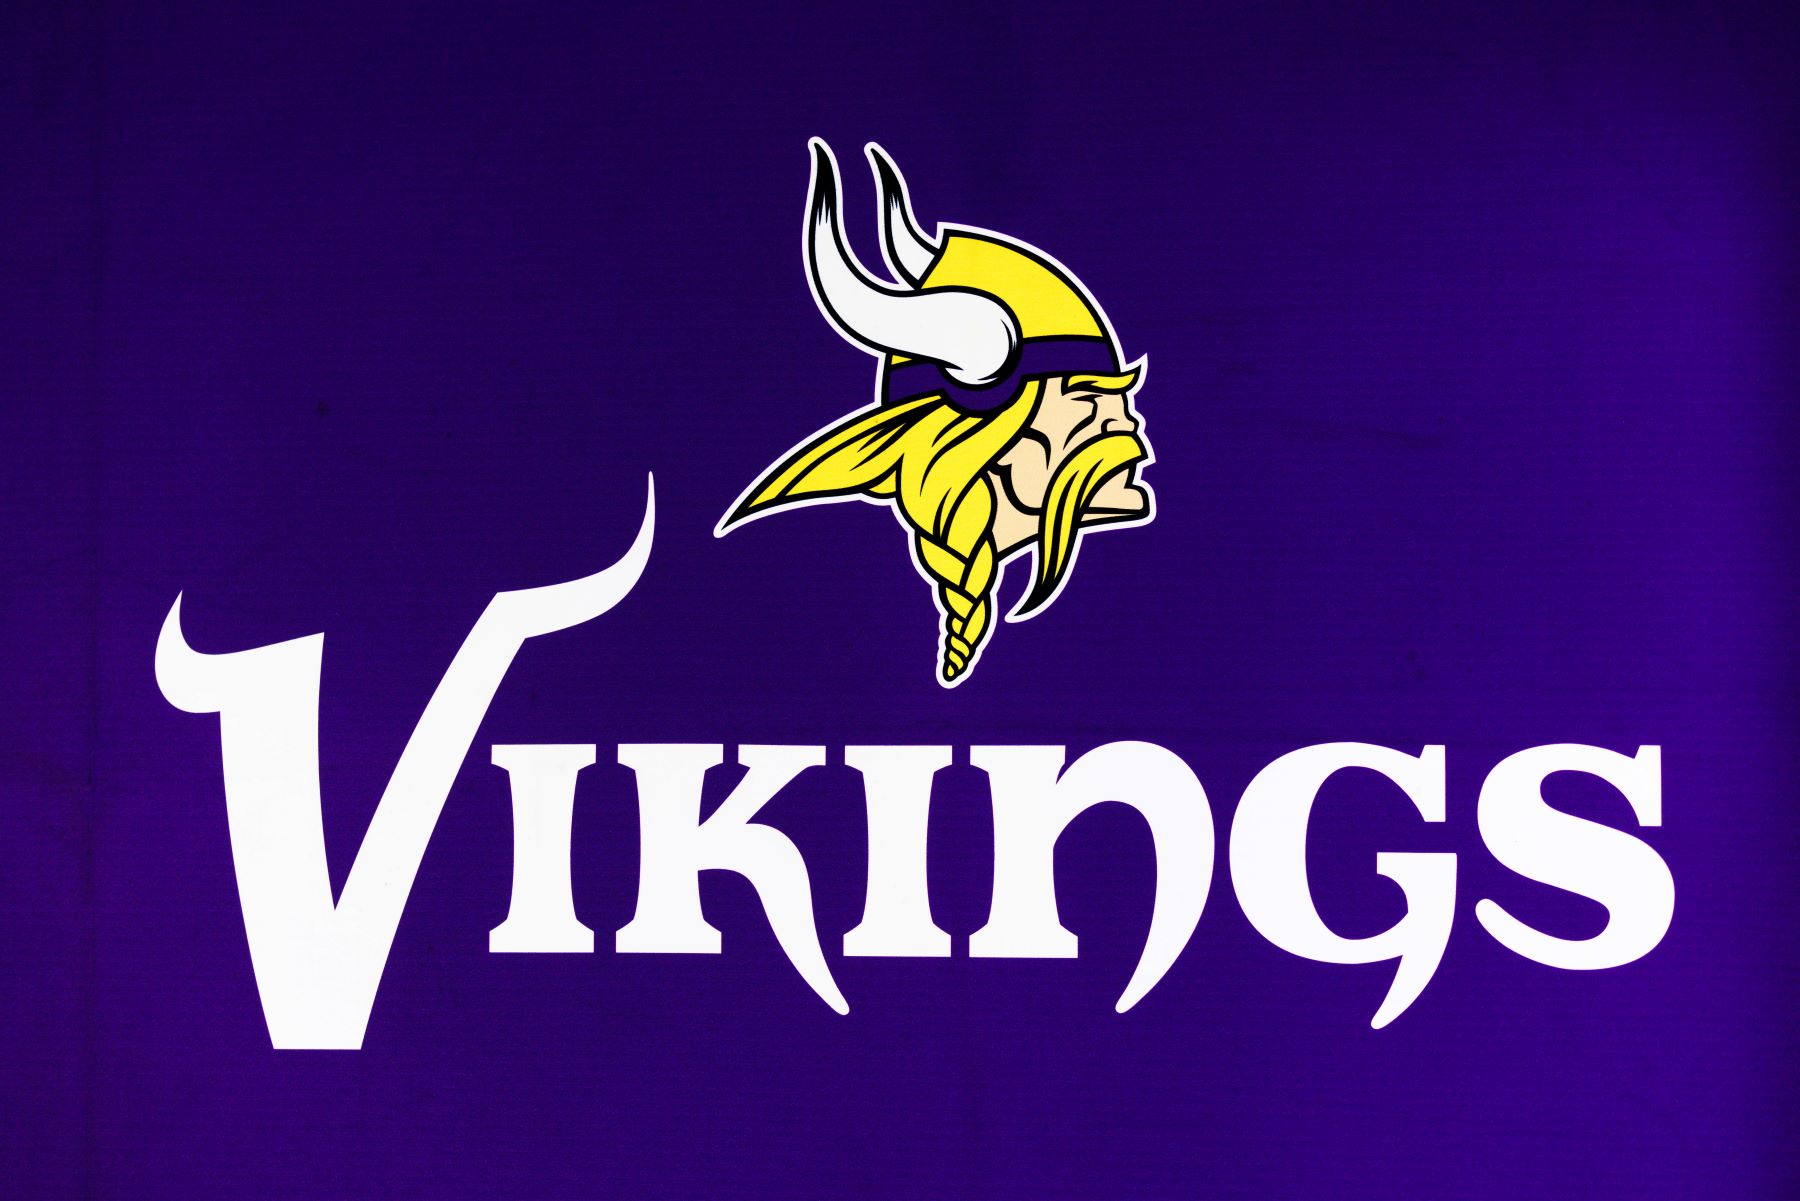 NFL team Minnesota Vikings logo seen at the Los Angeles Convention Center during the Super Bowl Experience